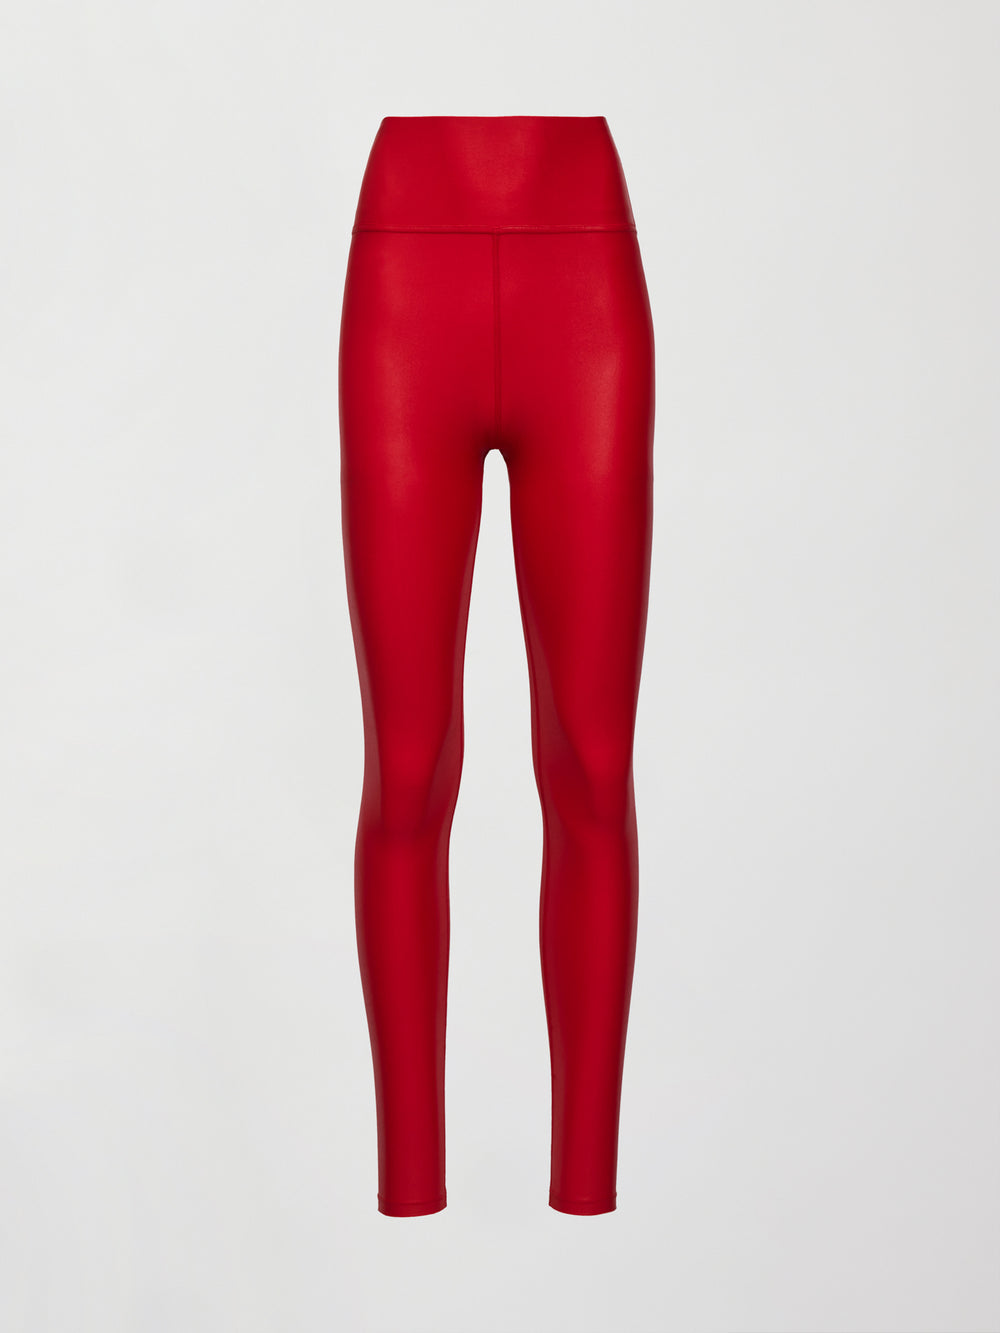 Carbon 38 Red Paneled High Rise Leggings Size XS